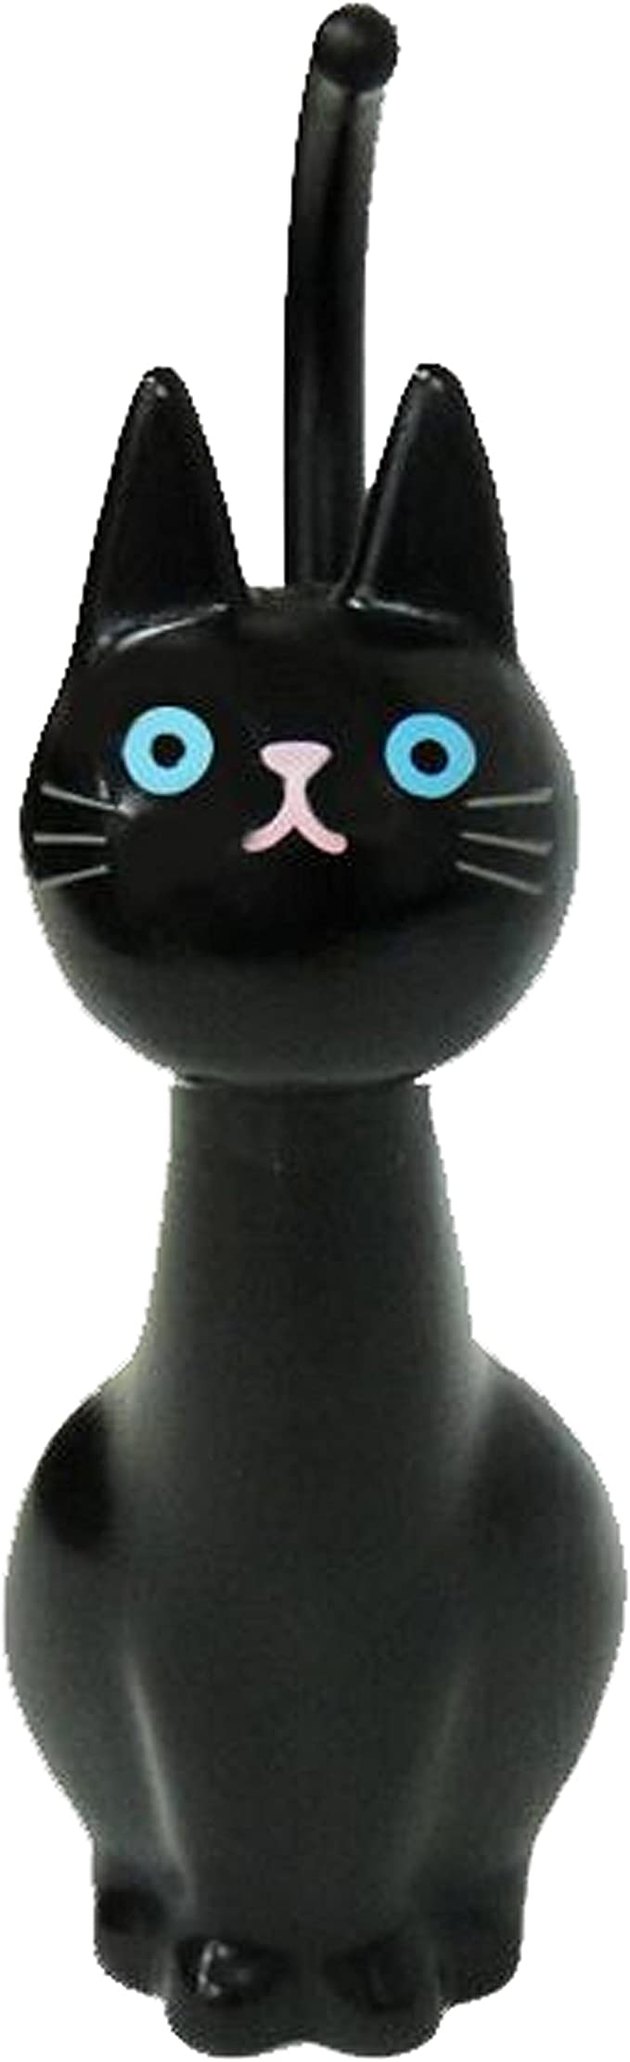 Who wants a boring toilet brush when you can have a cute little cat toilet brush instead?